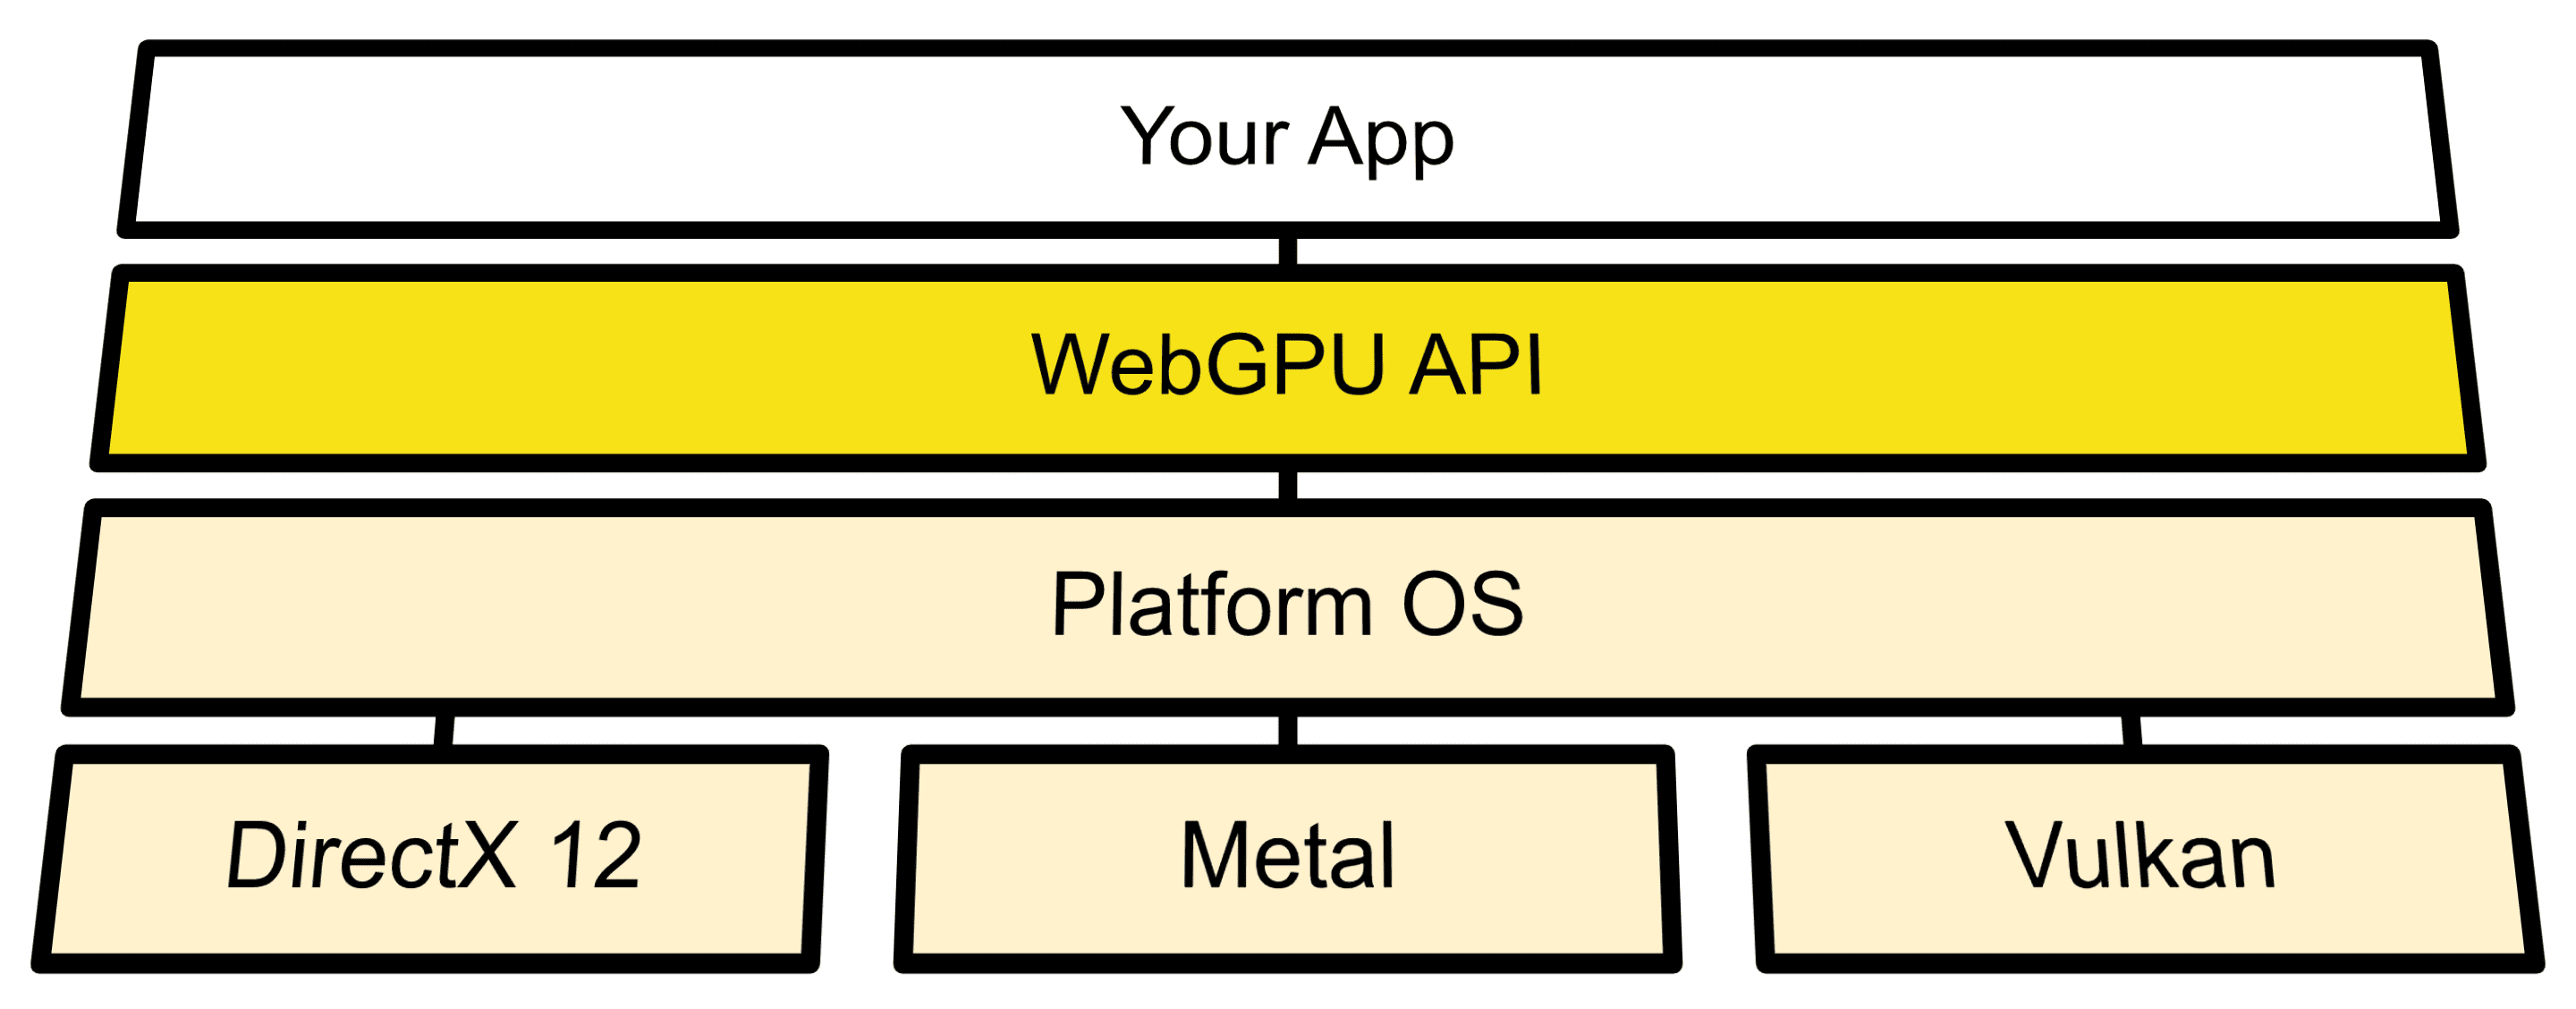 Architecture diagram showing WebGPUs connection between OS APIs and Direct3D 12, Metal, and Vulkan.